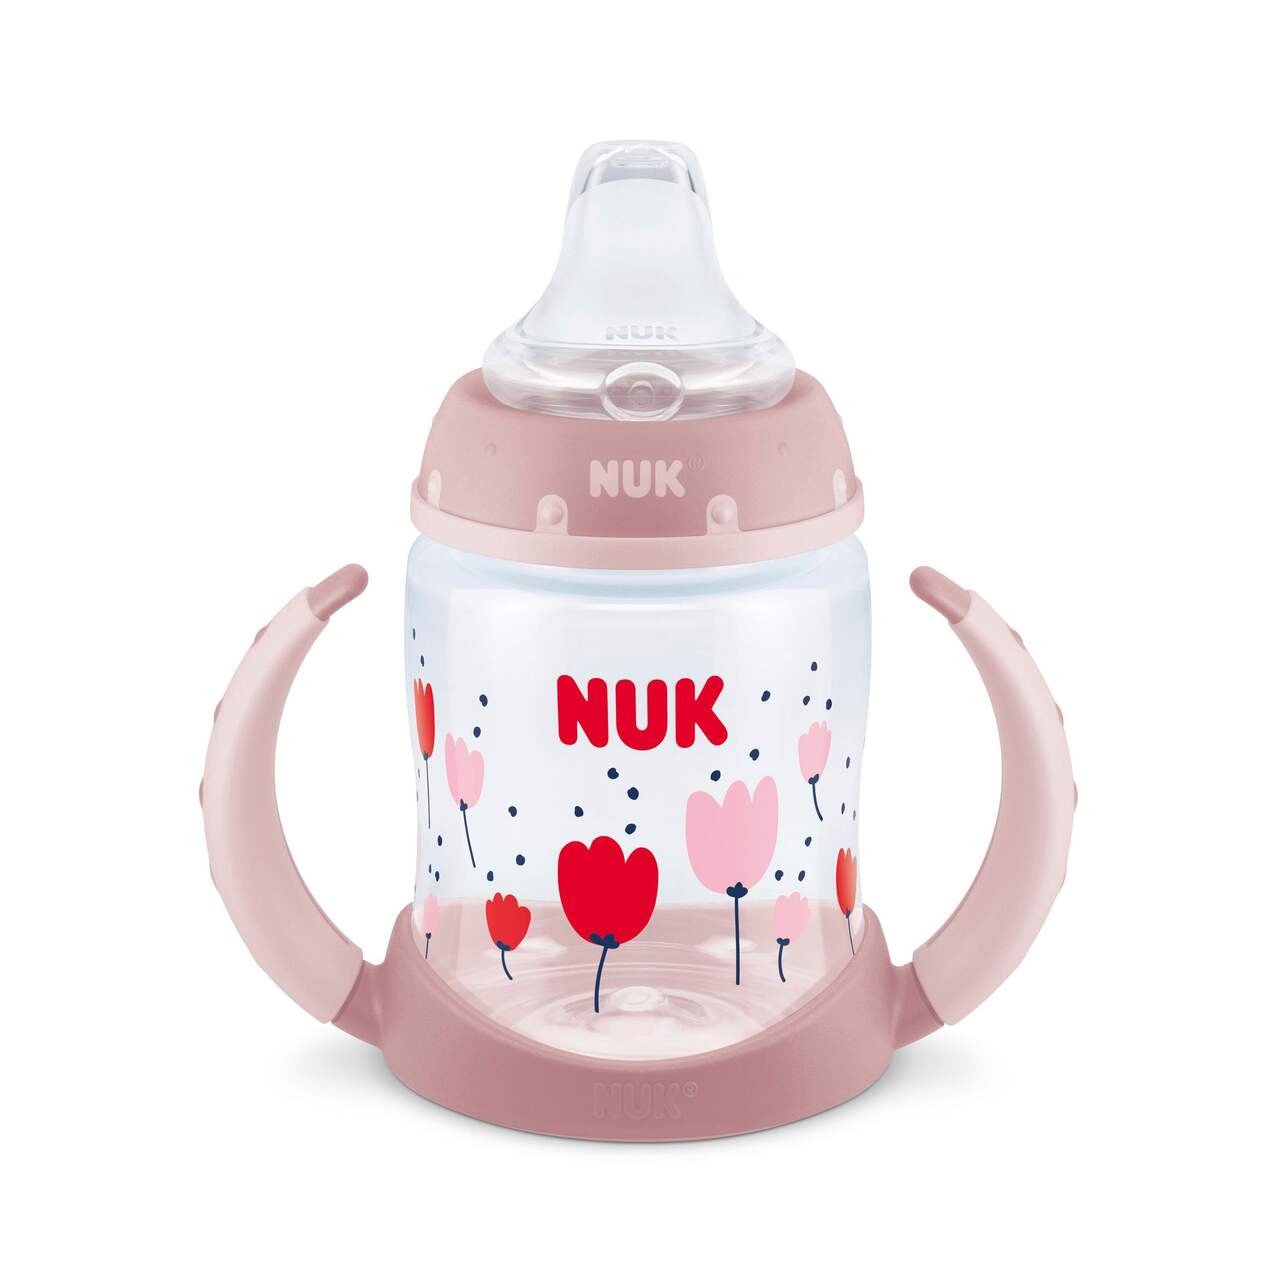 https://media-www.canadiantire.ca/product/automotive/car-care-accessories/child-travel-safety/0468495/nuk-5oz-learning-cup-de7d6aca-a666-4544-9d6e-68fb8b0e25d7-jpgrendition.jpg?imdensity=1&imwidth=640&impolicy=mZoom